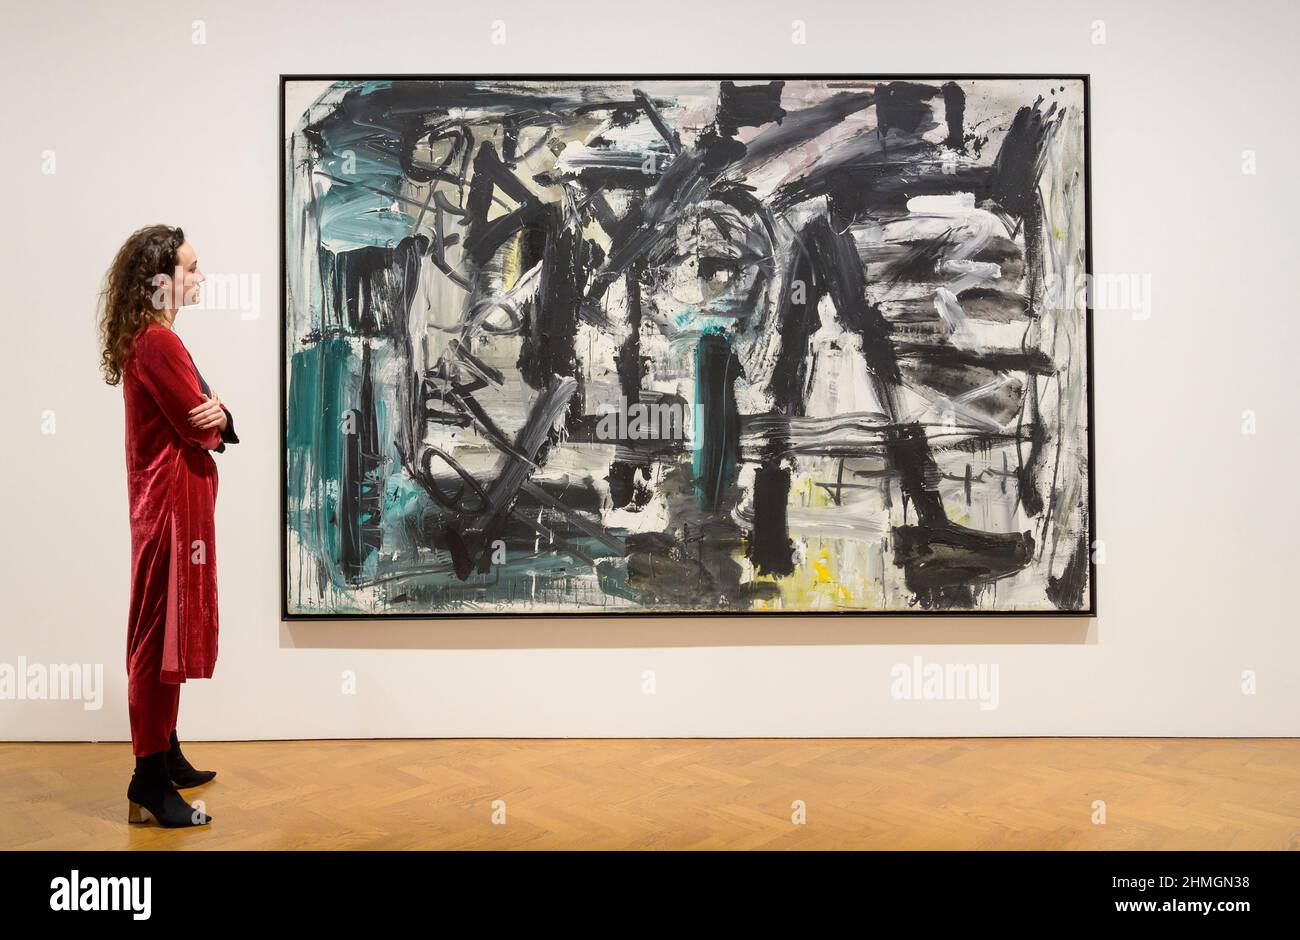 Thaddaeus Ropac, London, UK, 10 February 2022. First solo exhibition of Italian Expressionist artist Emilio Vedova’s (1919-2006) large canvases in the UK, all from the documenta 7 exhibition in 1982. These paintings are shown alongside a selection of important works from the 1980s, a period considered the pinnacle of the artist’s career. Presented in association with the Fondazione Emilio e Annabianca Vedova, this exhibition marks the fourth decade since his participation in documenta 7 in Kassel and the 40th Venice Biennale, held in the same year. Stock Photo